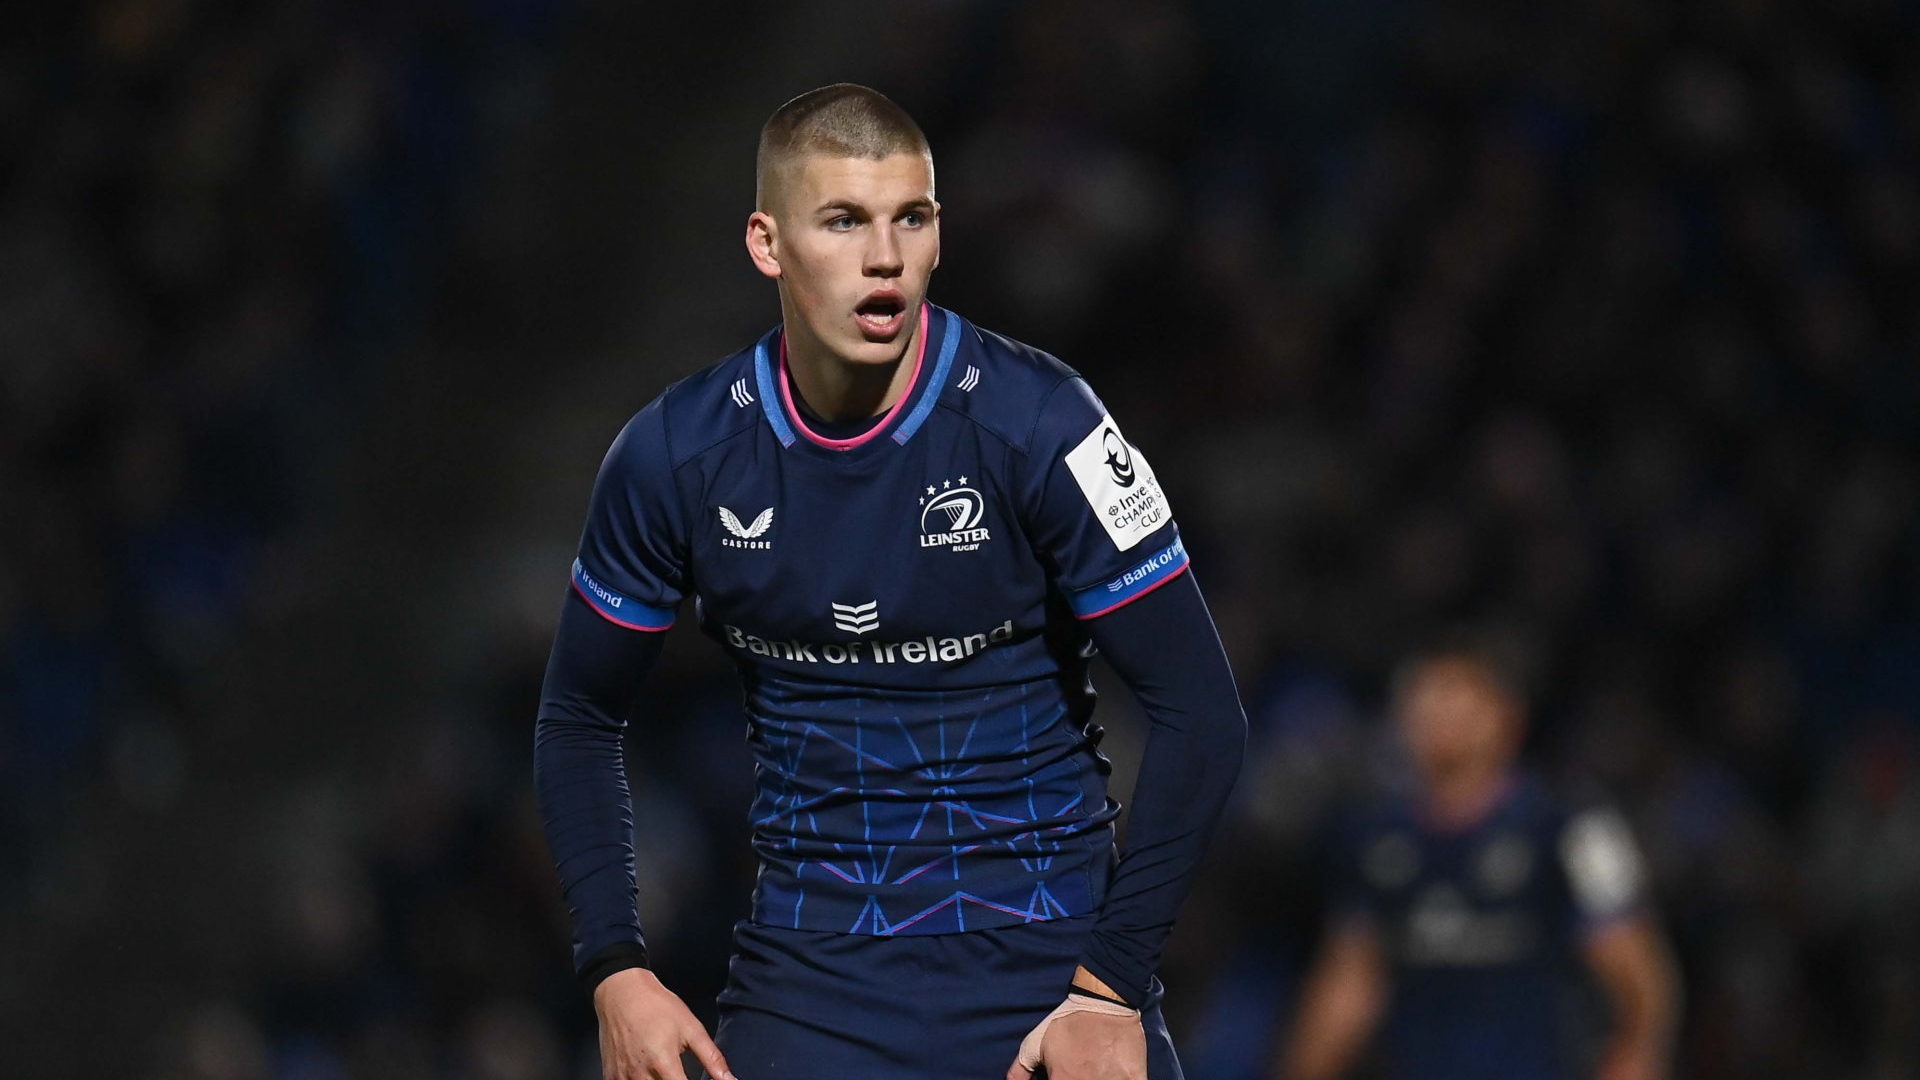 Sam Prendergast should be brought into the Ireland set up sooner rather than later, according to Munster and Ireland legend Keith Wood.